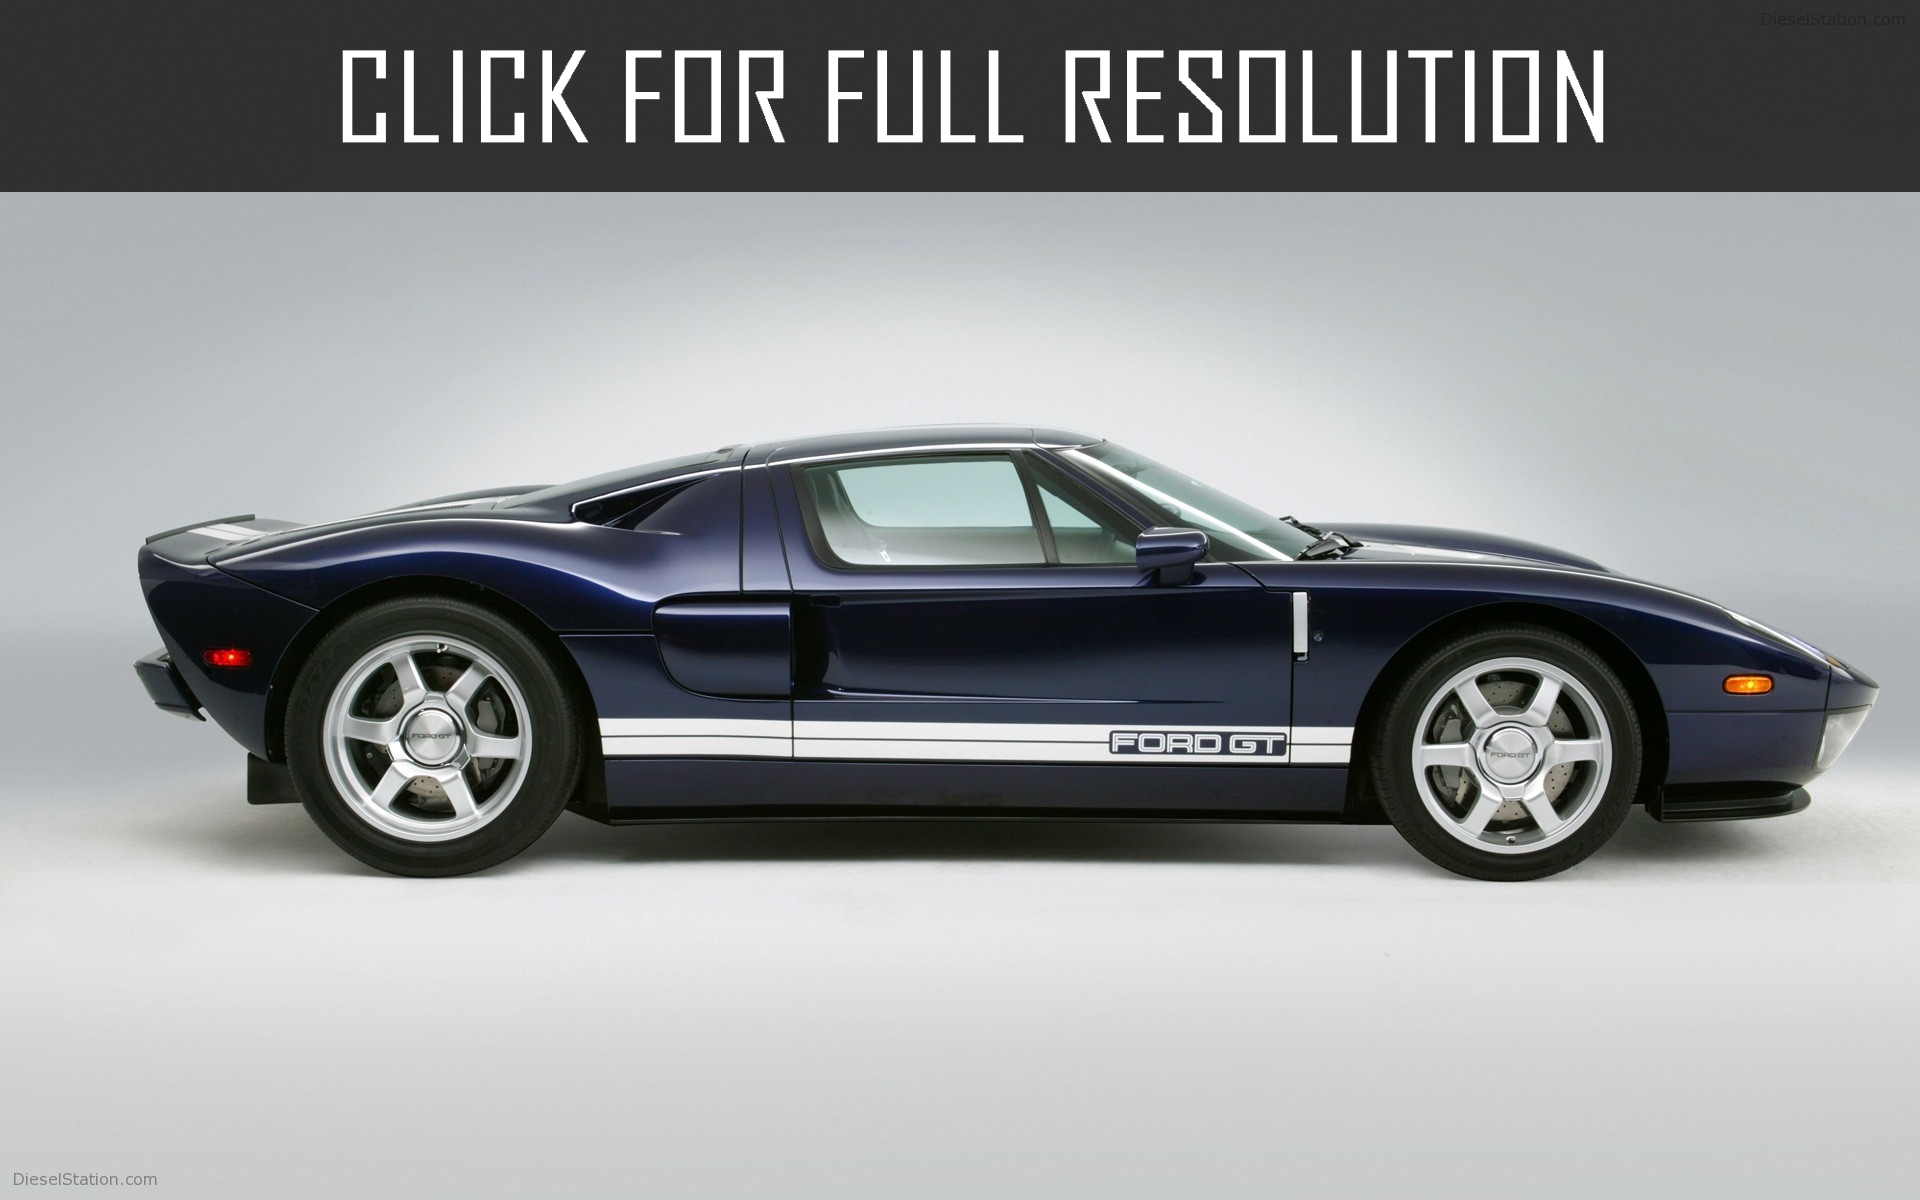 Ford Gt40 2012